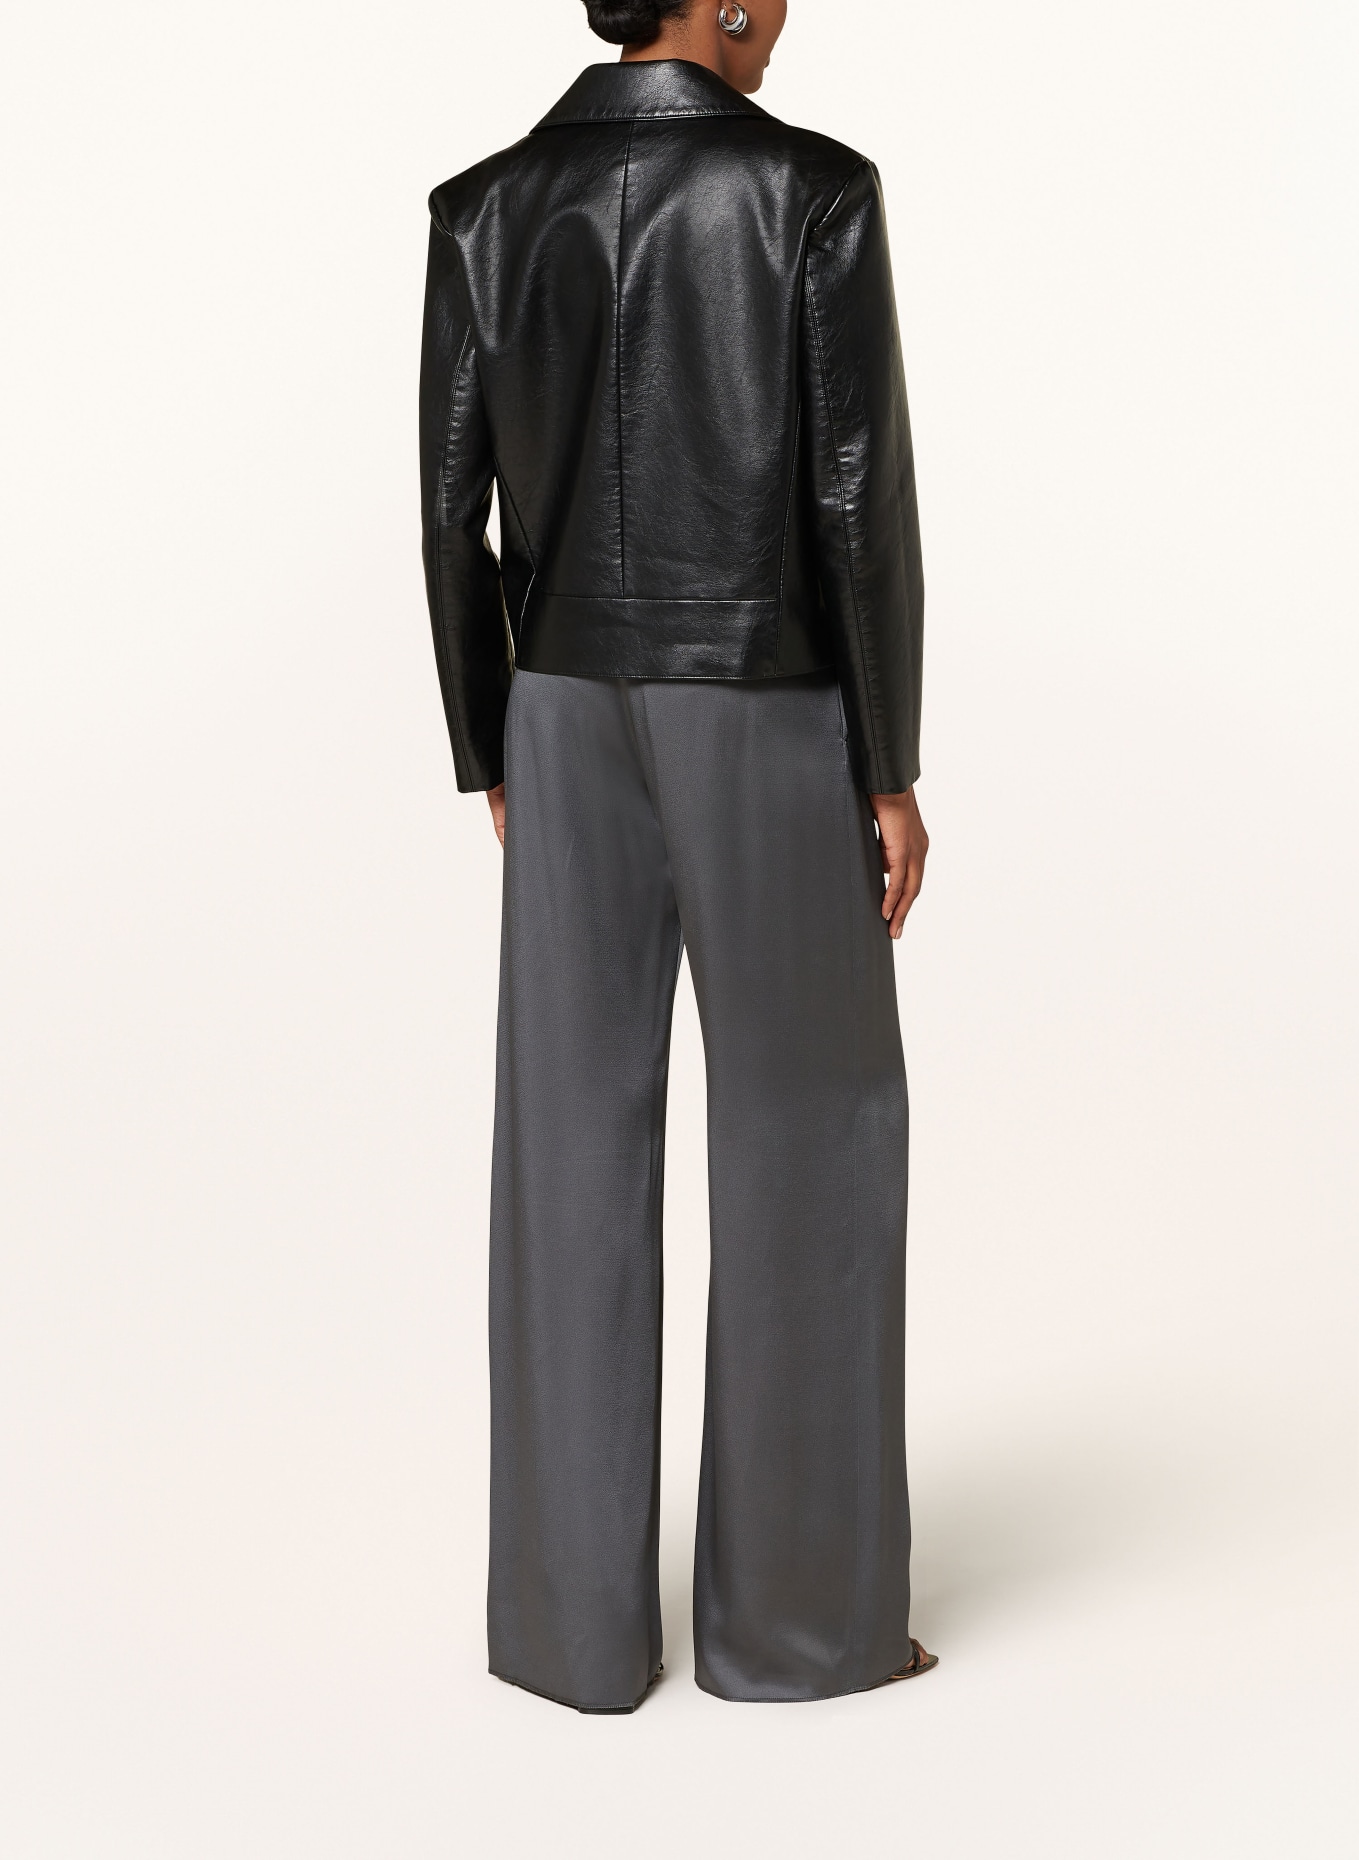 PATRIZIA PEPE Jacket in leather look, Color: BLACK (Image 3)